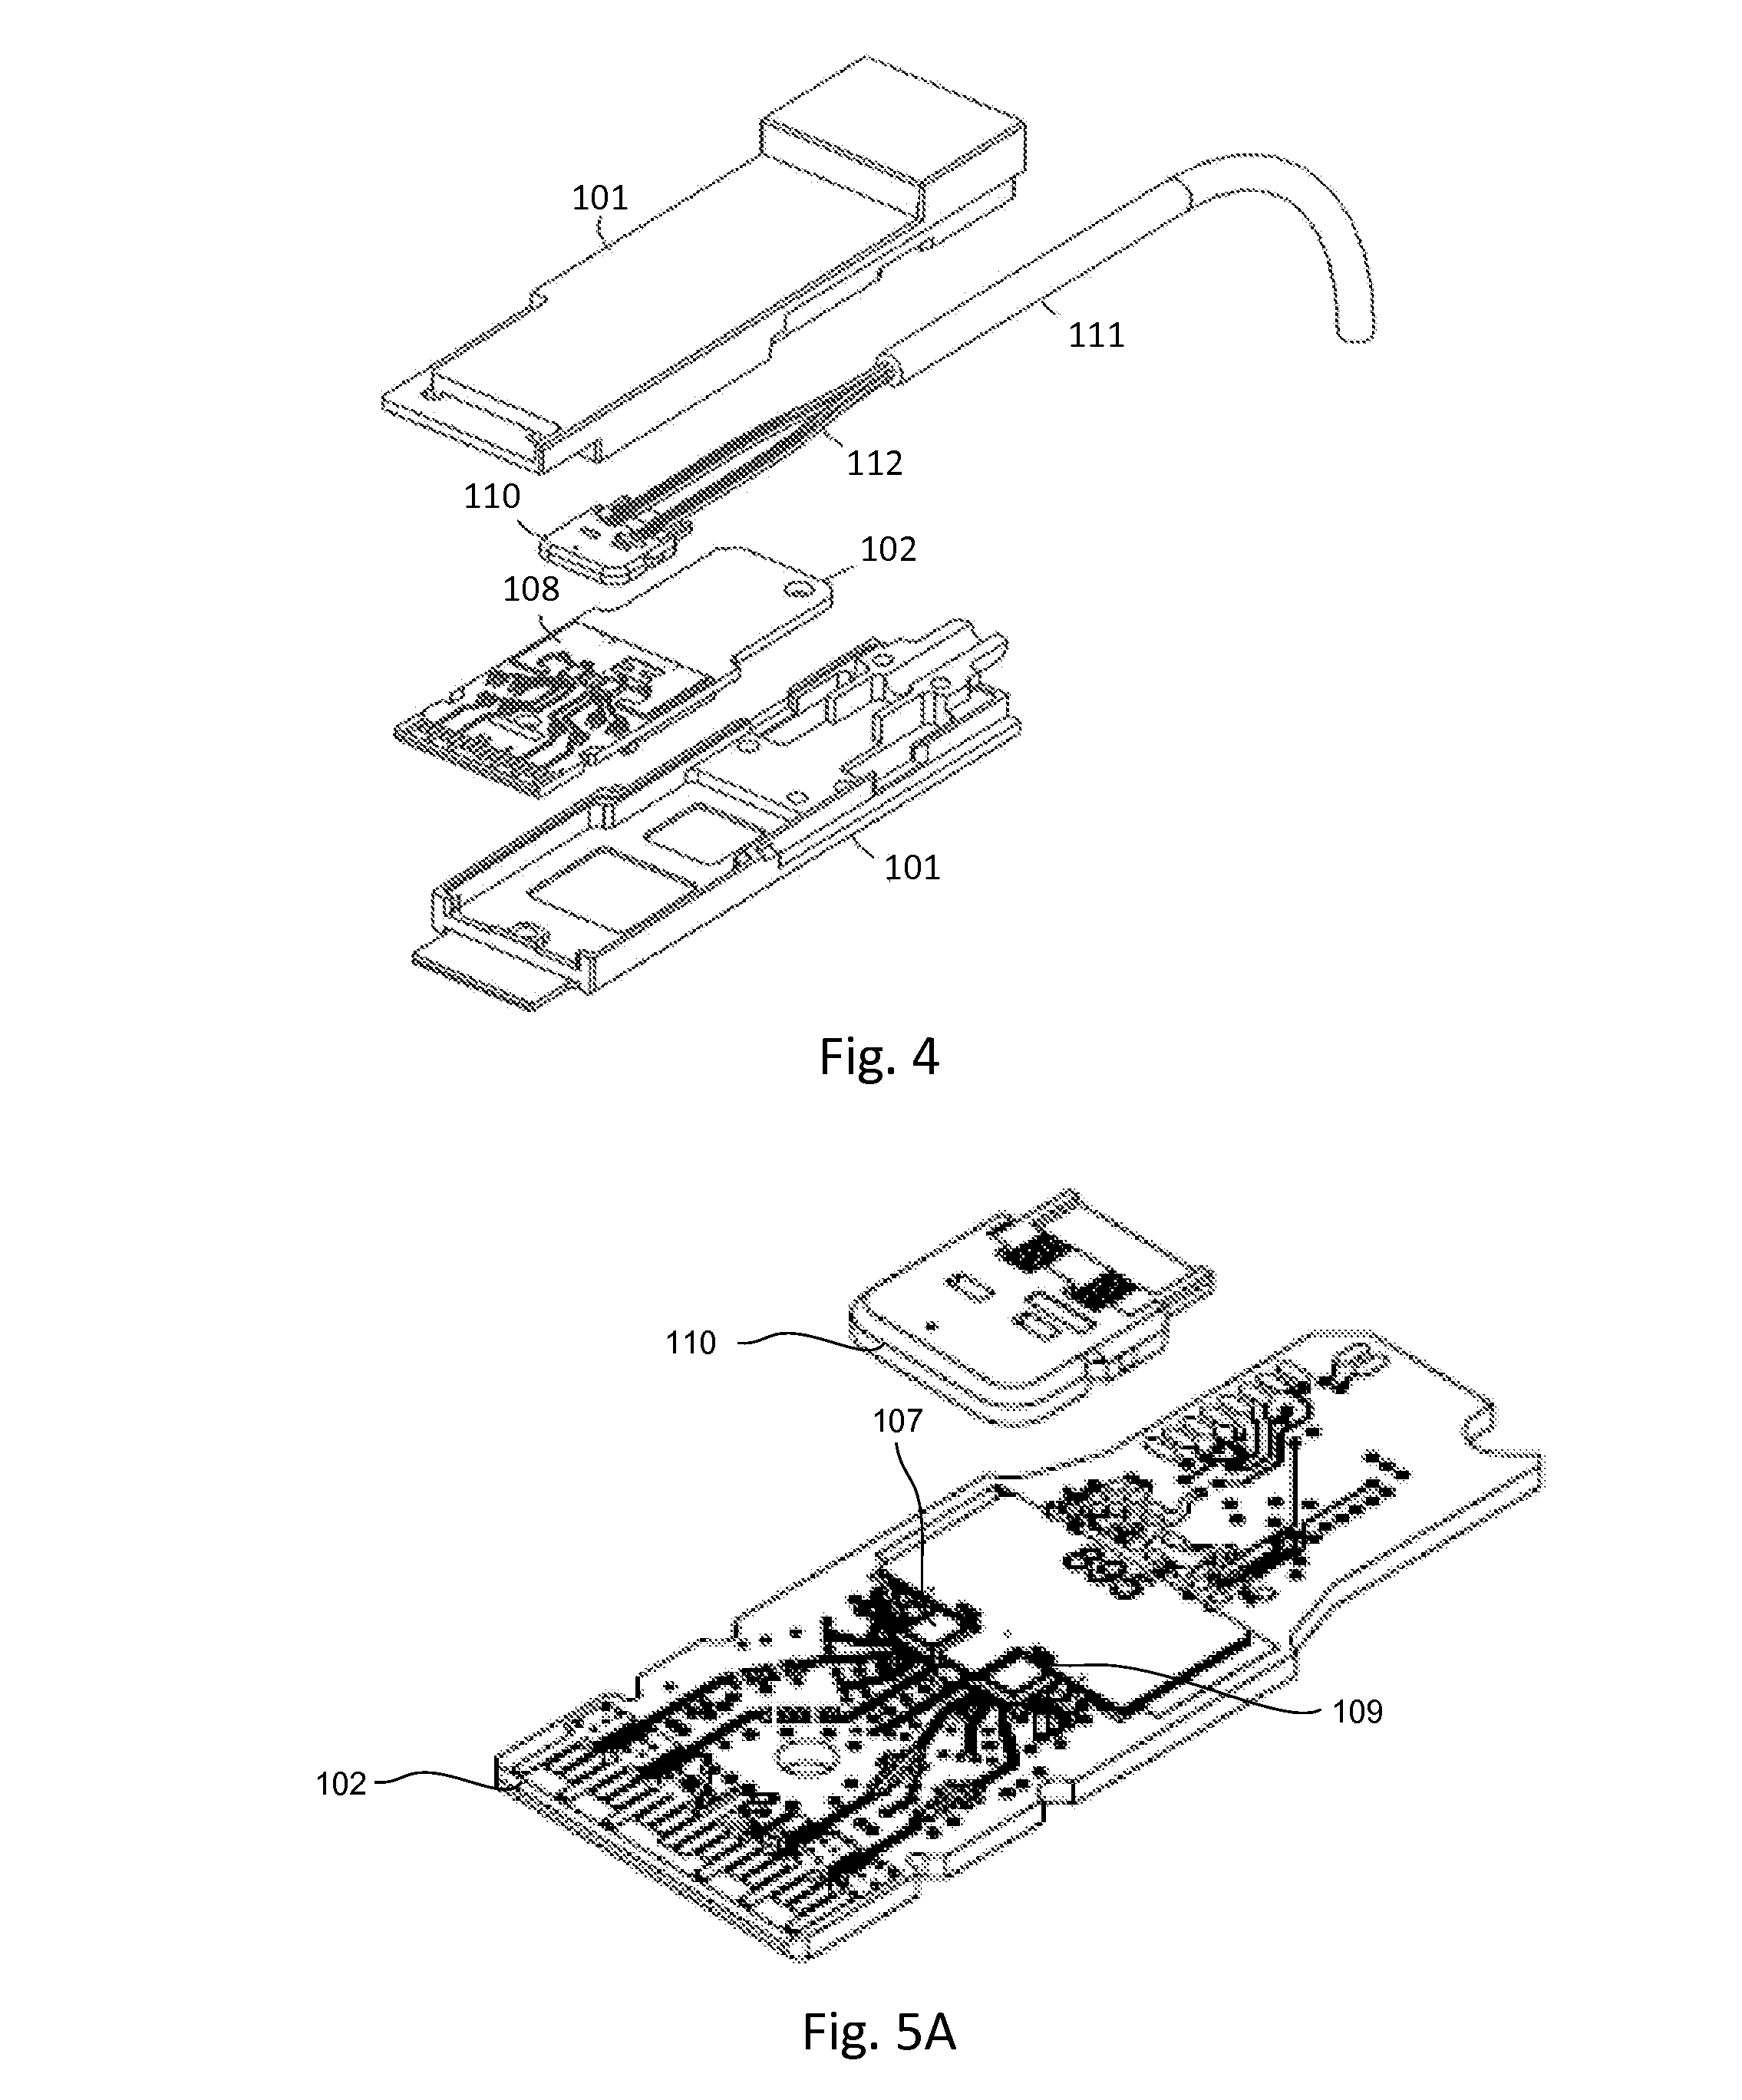 Methods for determining receiver coupling efficiency, link margin, and link topology in active optical cables